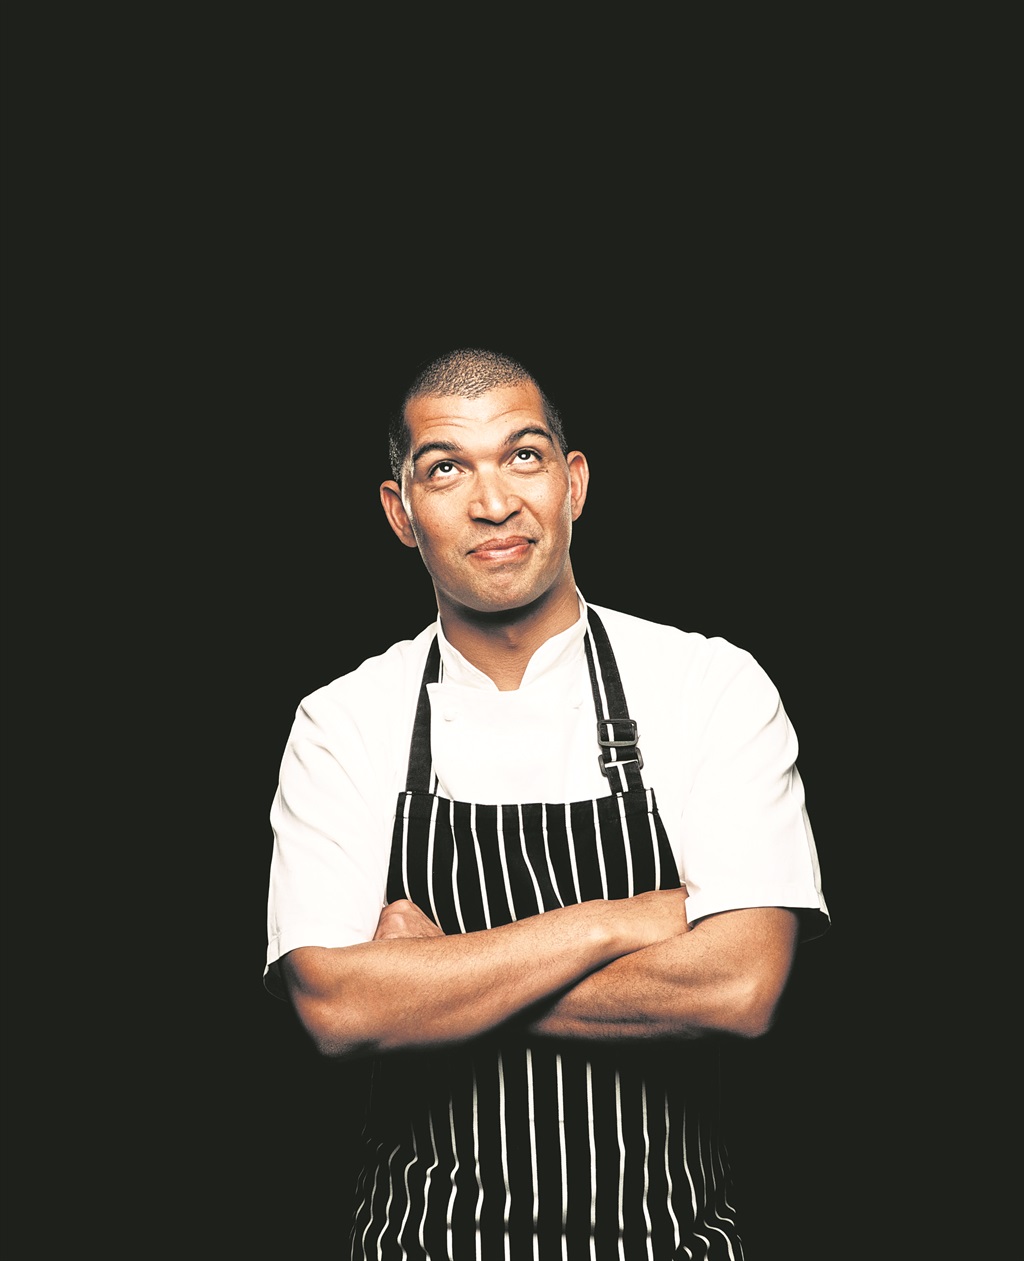 Try Reuben Riffel’s food at the upcoming DStv Delicious International Food and Music Festival.